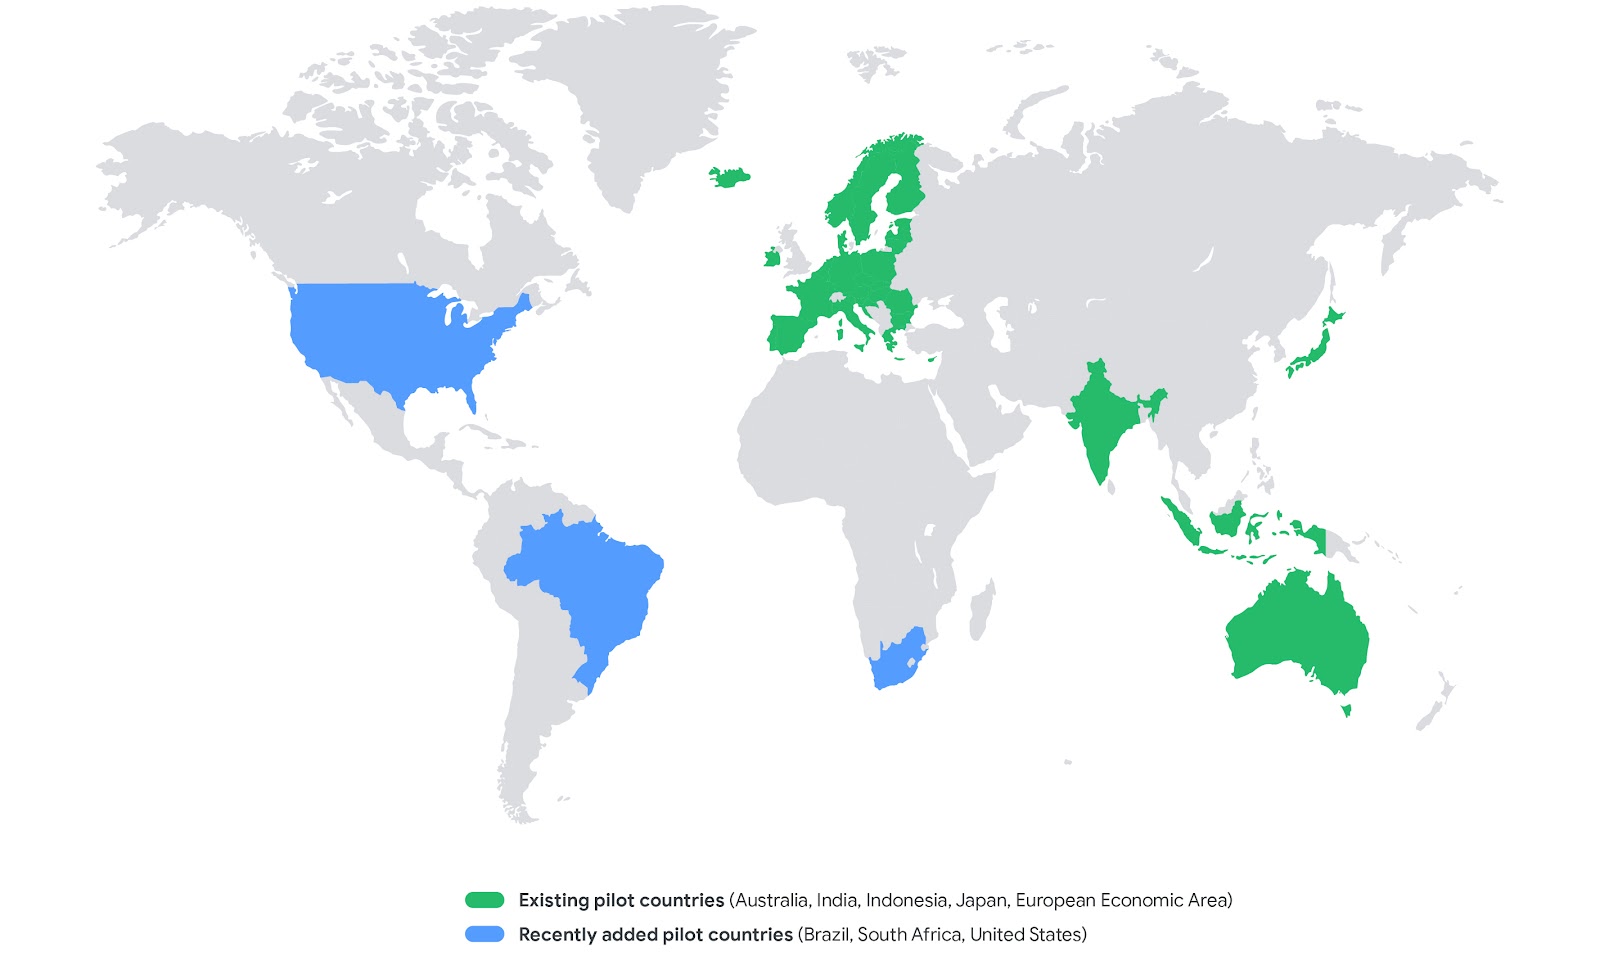 Greyscaled world map highlighting existing pilot countries in green (Australia, India, Indonesia, Japan, European Economic Area) and recently added pilot countries in blue (Brazil, South Africa, United States)